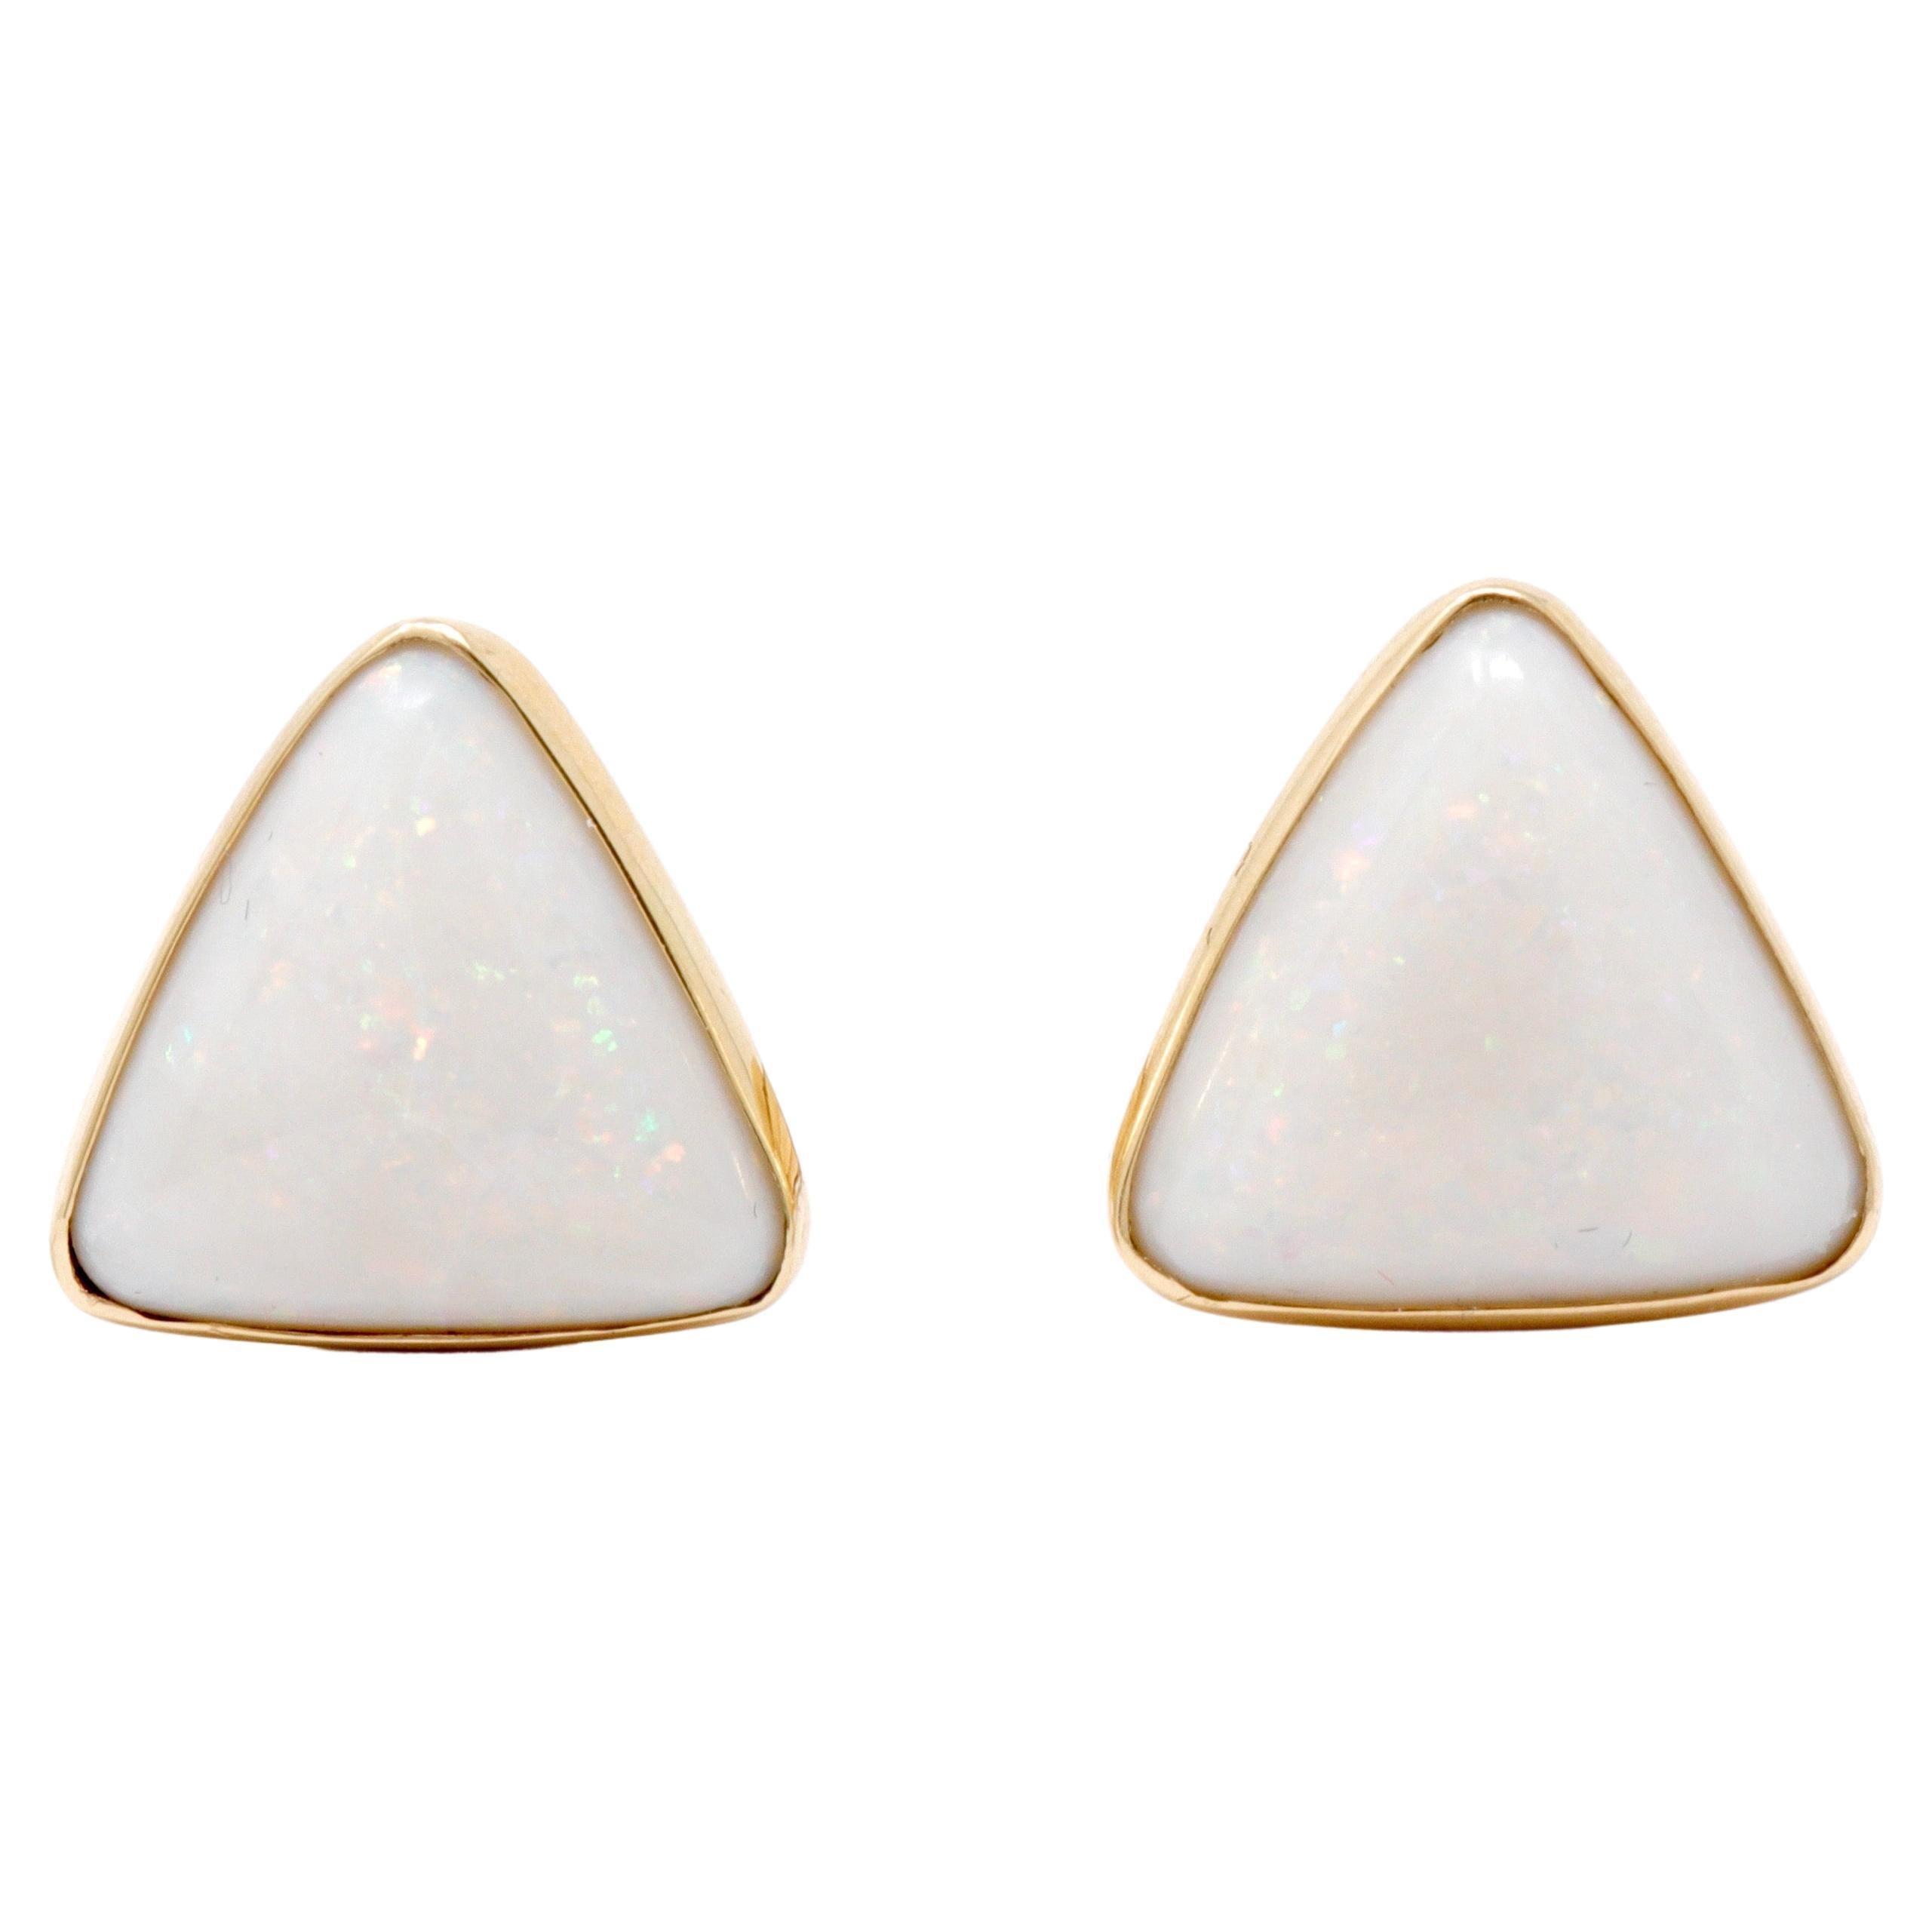 Vintage 14K Yellow Gold and White Opal Cufflinks. For Sale